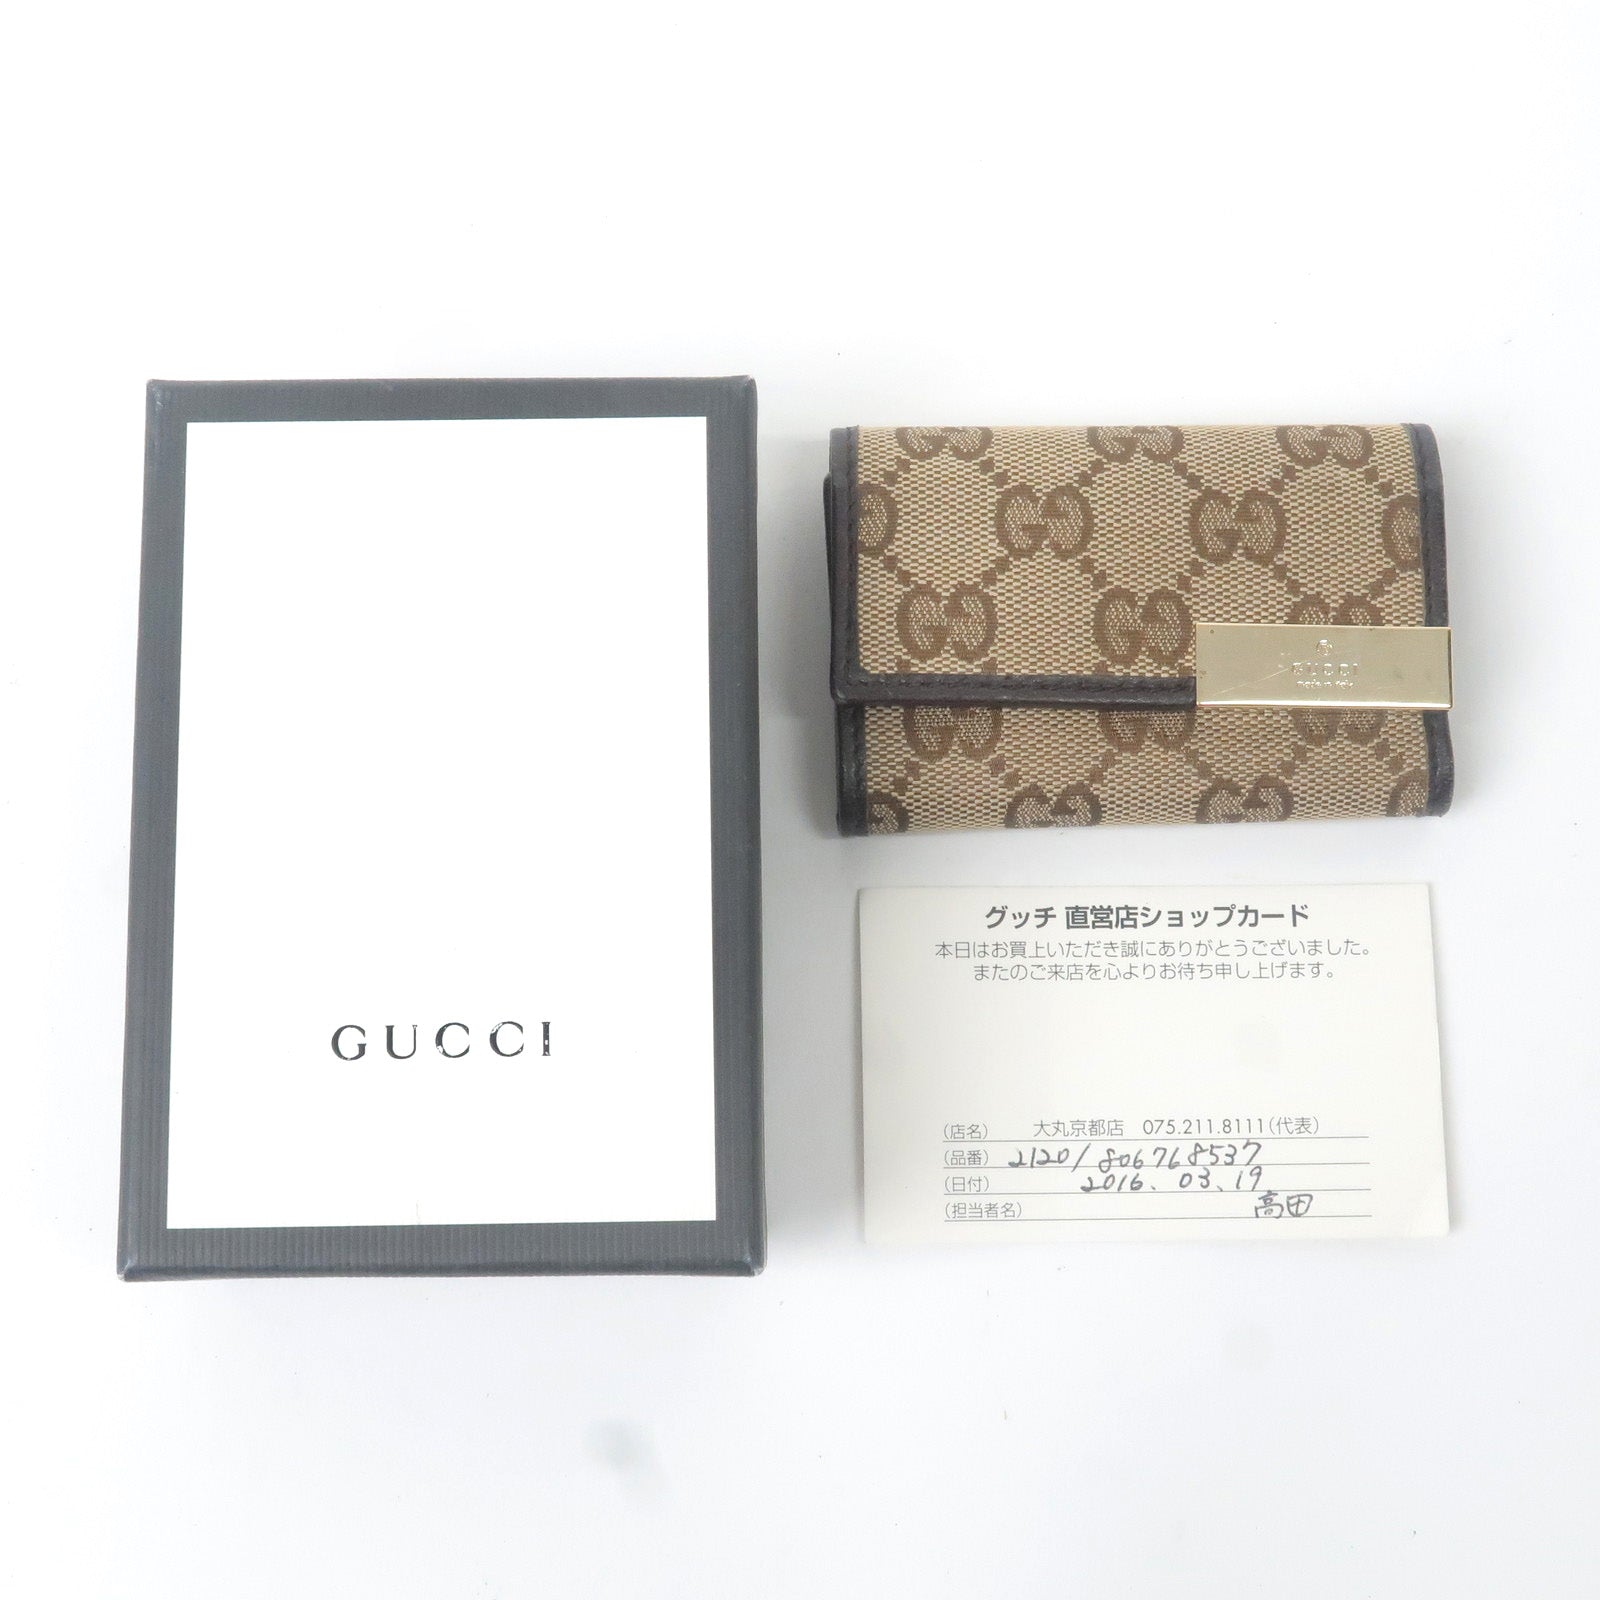 Gucci Beige/Metallic GG Canvas and Leather Heart 6 Key Holder Case